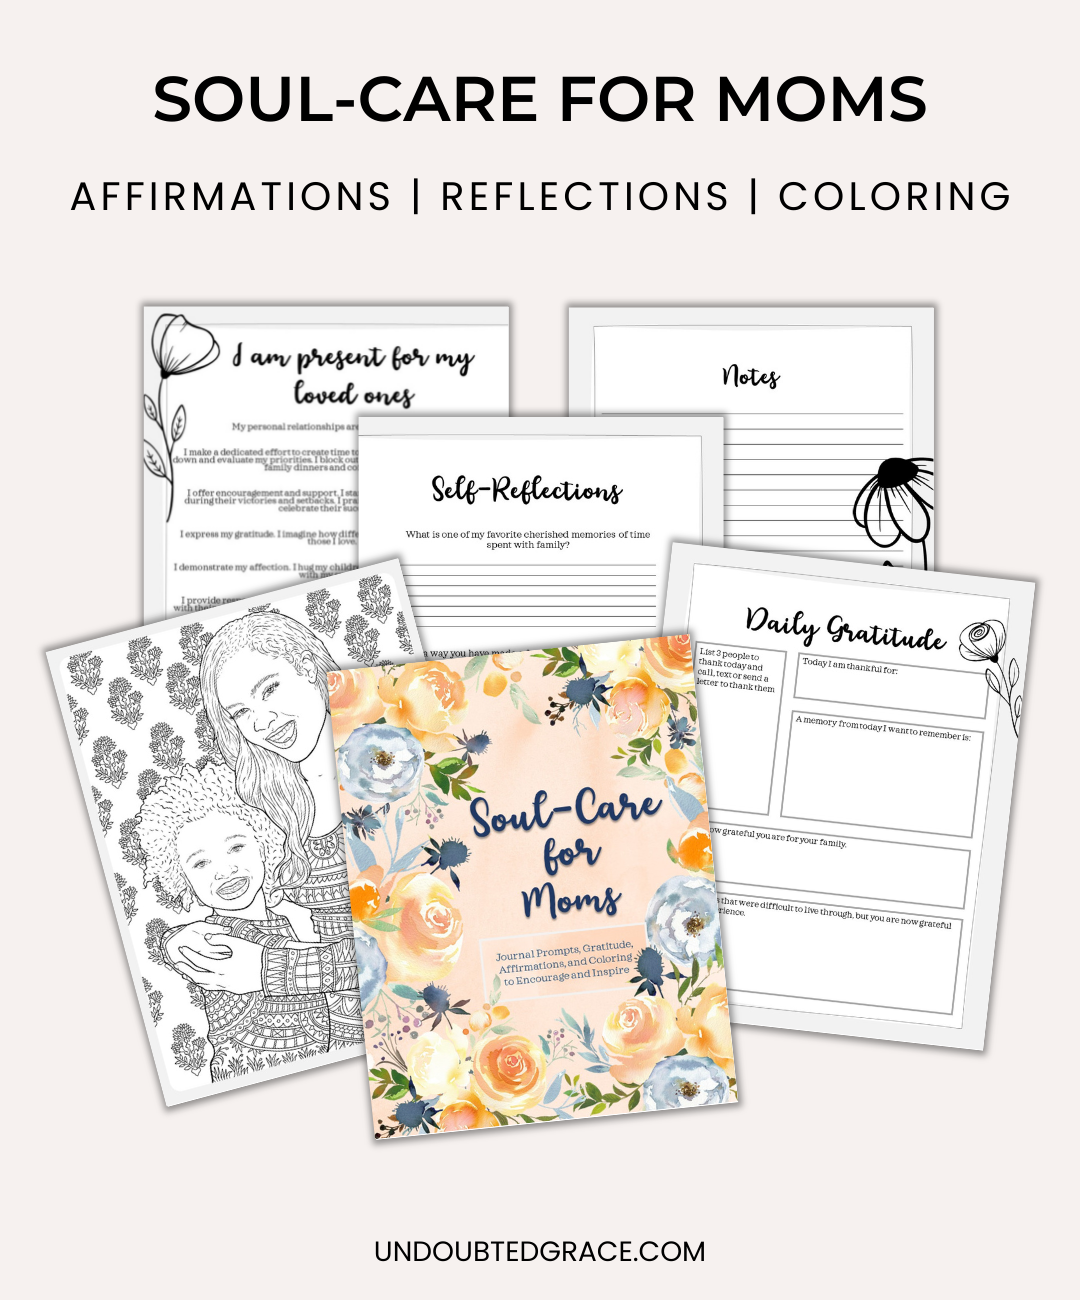 Soul-Care for Moms - Printable